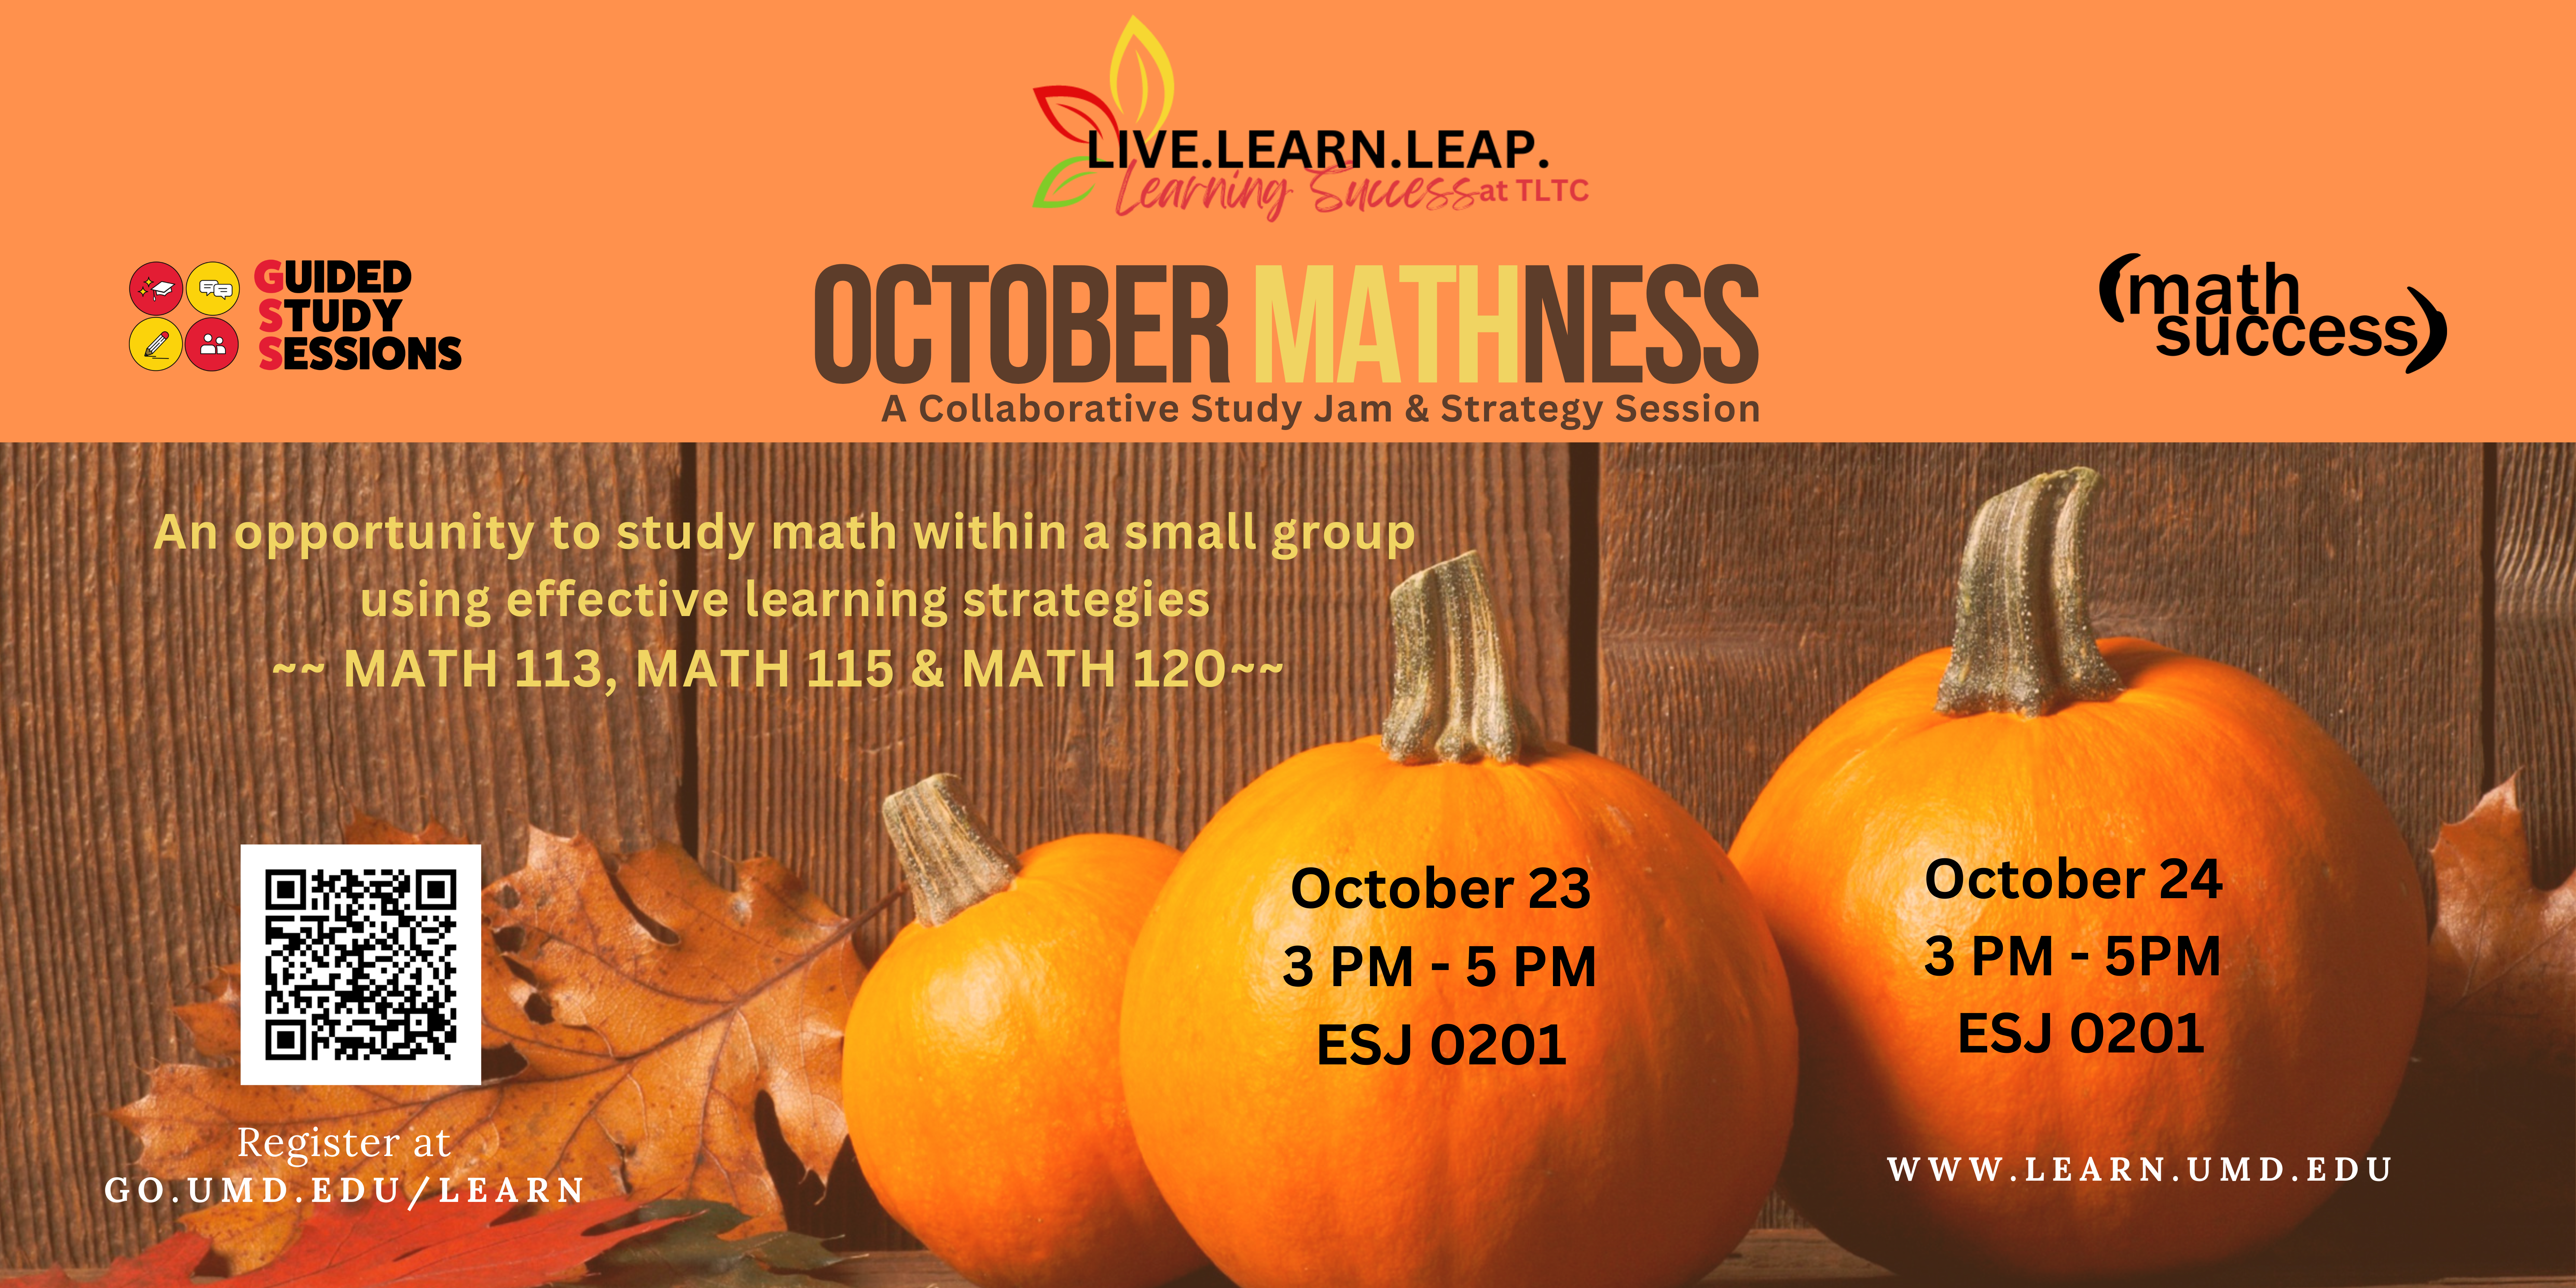 Orange header bar with Guided Study Sessions logo, Live.Learn.Leap. Learning Success at TLTC logo, Math Success logo. Title: October Mathness: A collaborative study jam and strategy session. Fall leaves and three pumpkins with overlaid text: An opportunity to study math within a small group using effective learning strategies. Math 113, Math 115, & Math 120. QR code, Register at go.umd.edu/learn. October 23 3pm-5pm ESJ 0201. October 23 3pm-5pm ESJ 0201. www.learn.umd.edu